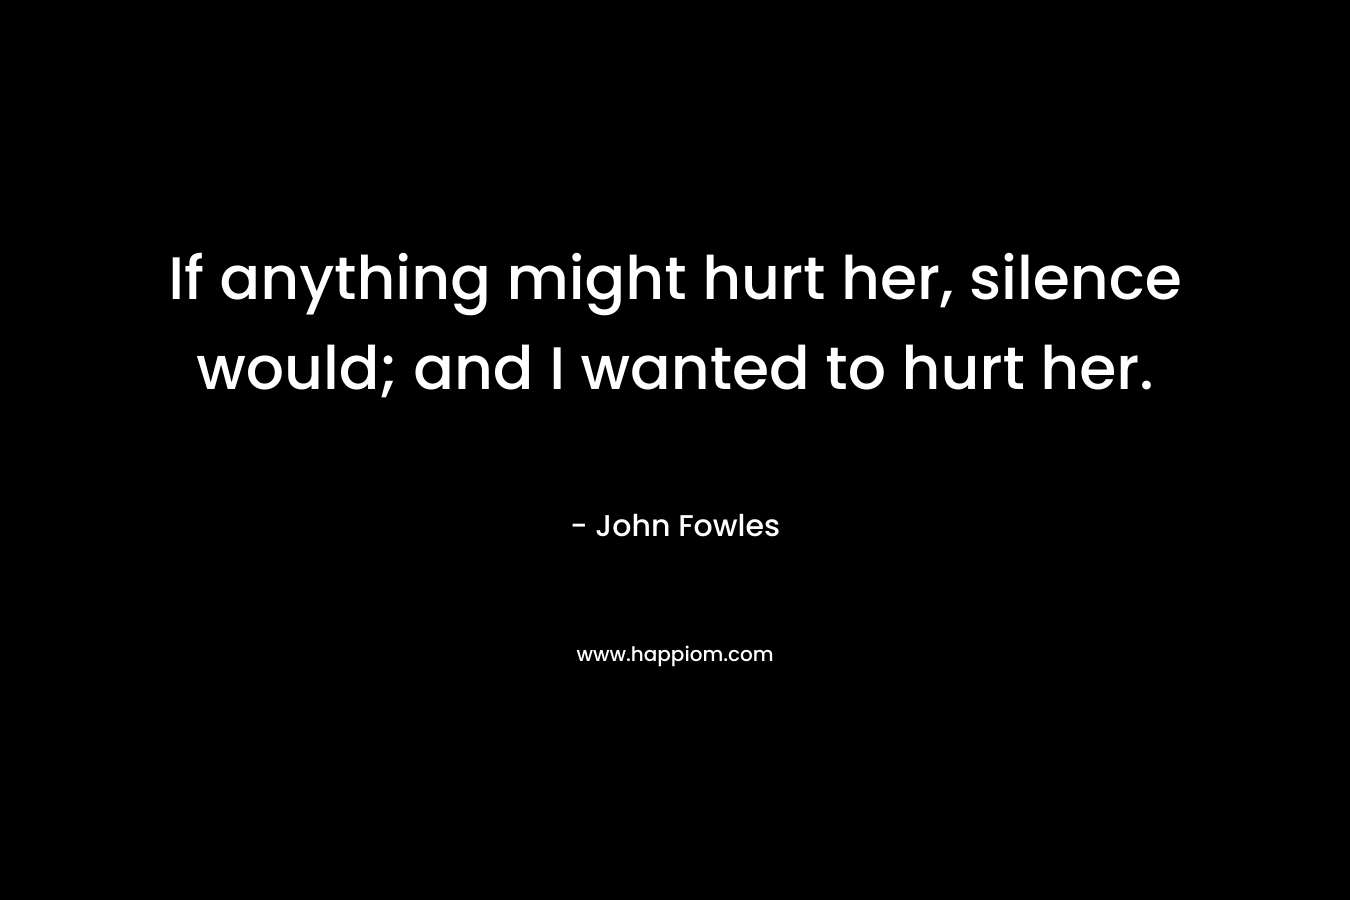 If anything might hurt her, silence would; and I wanted to hurt her.